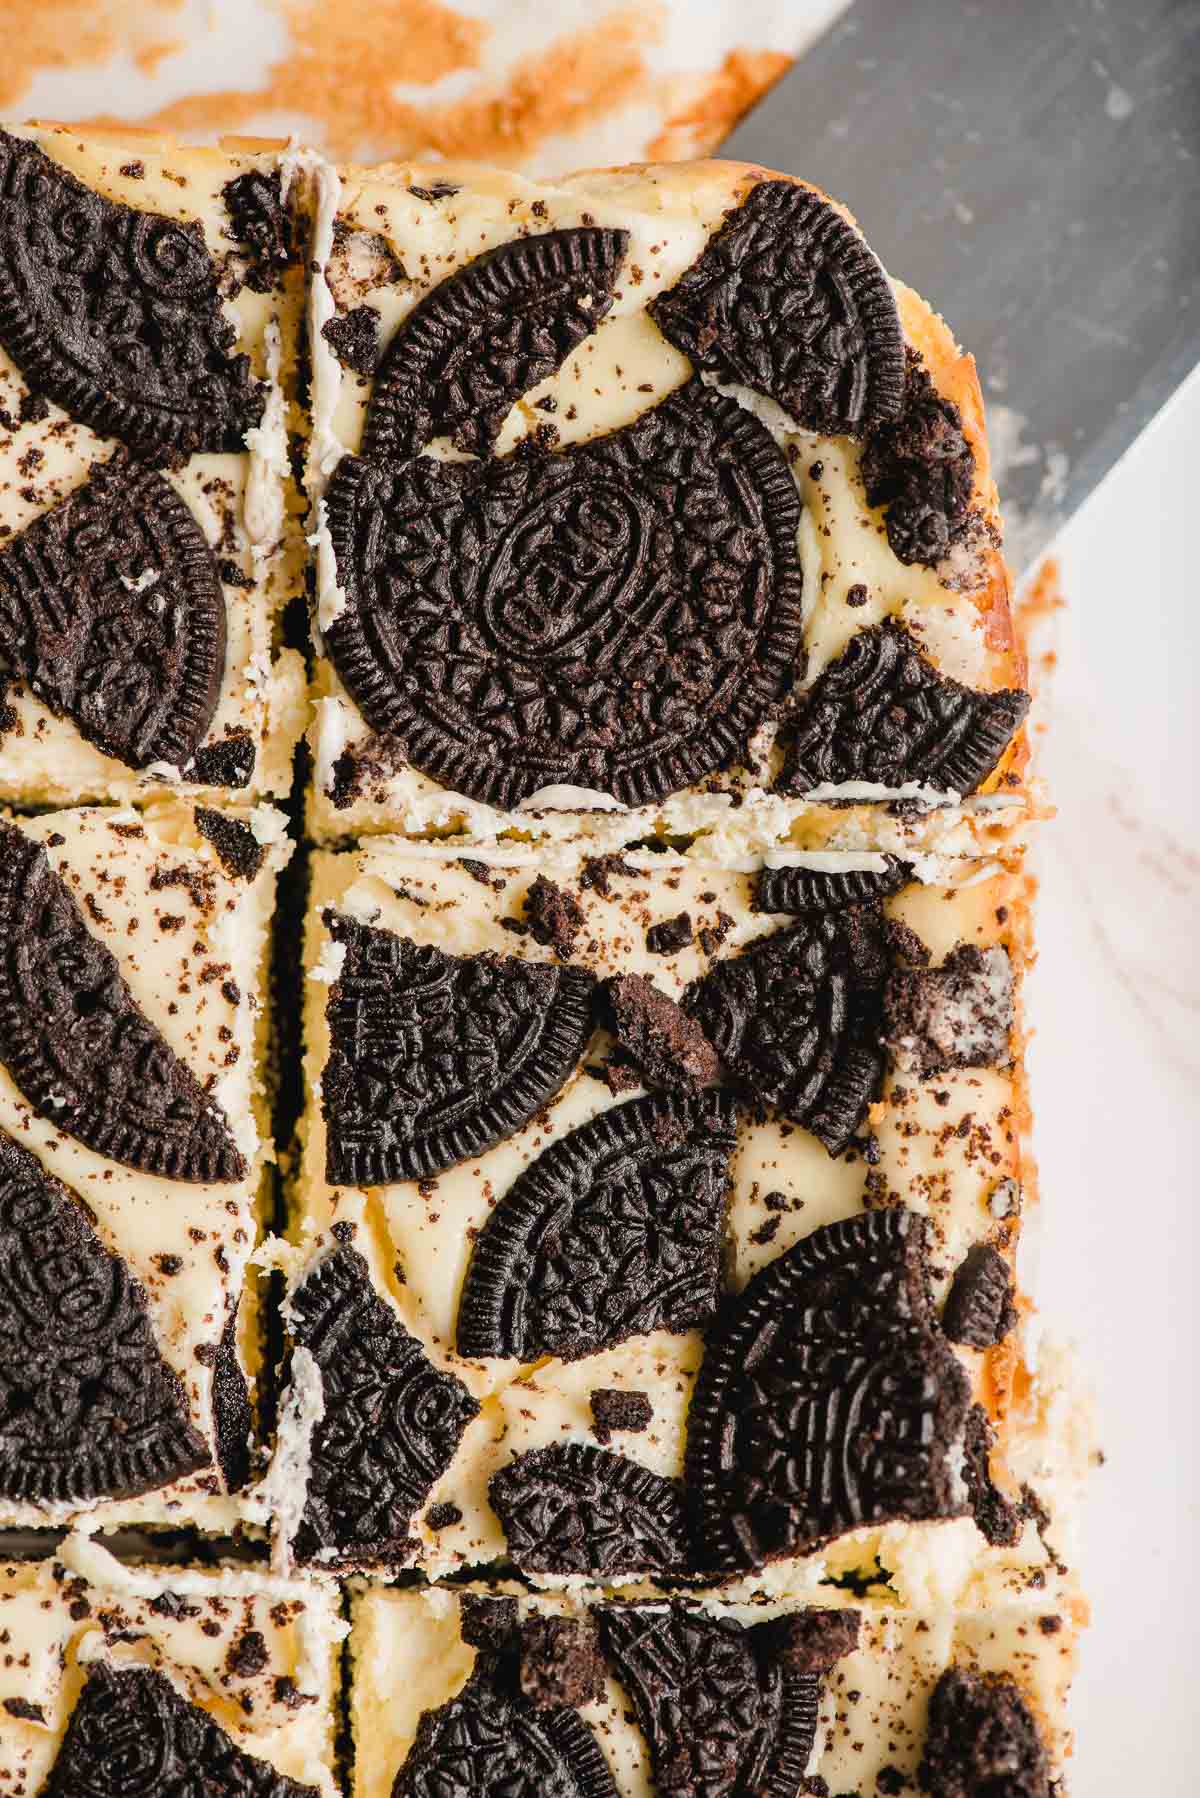 Spatula scooping out a slice of Oreo cheesecake.